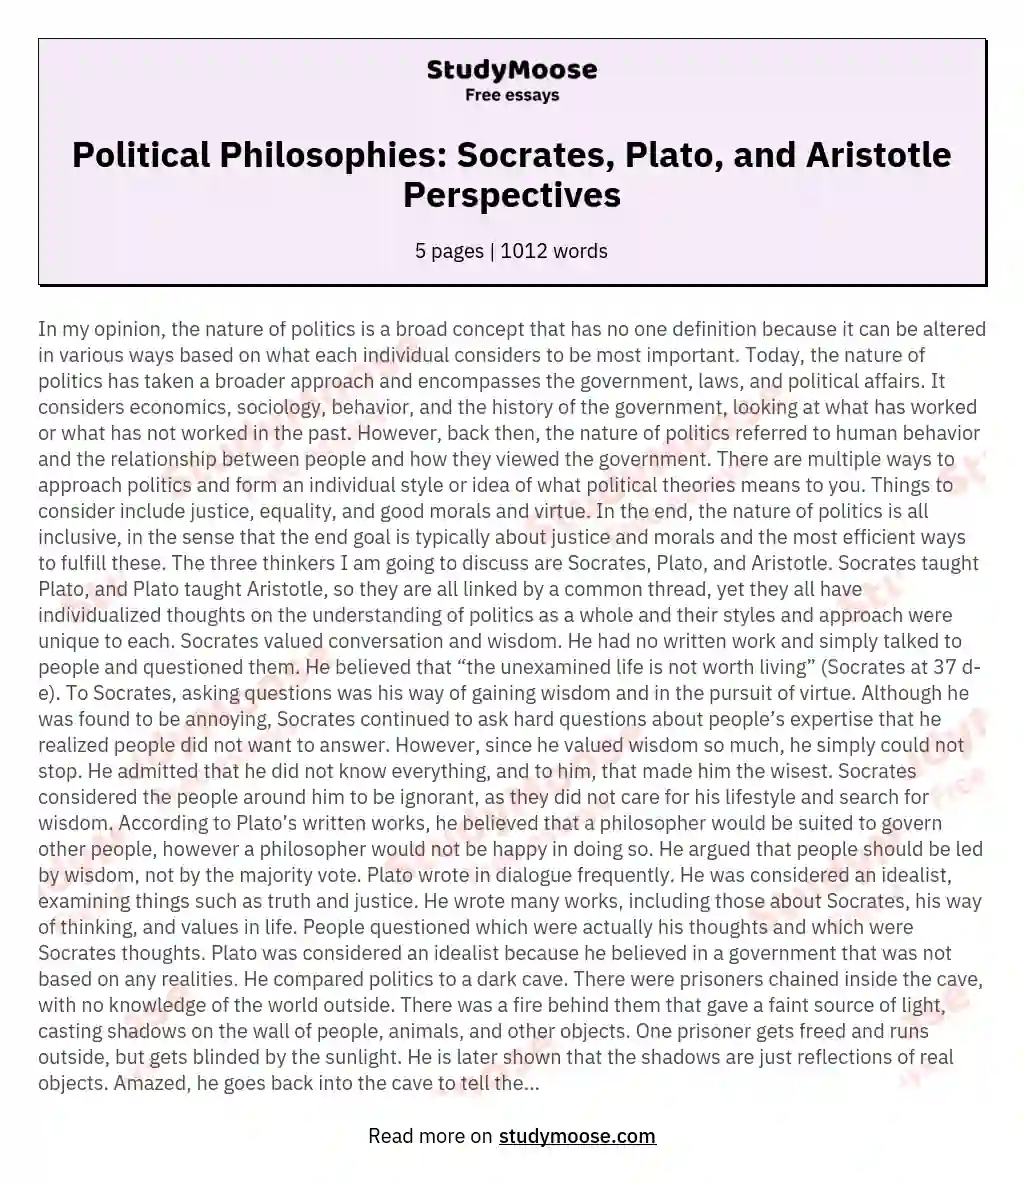 Political Philosophies: Socrates, Plato, and Aristotle Perspectives essay